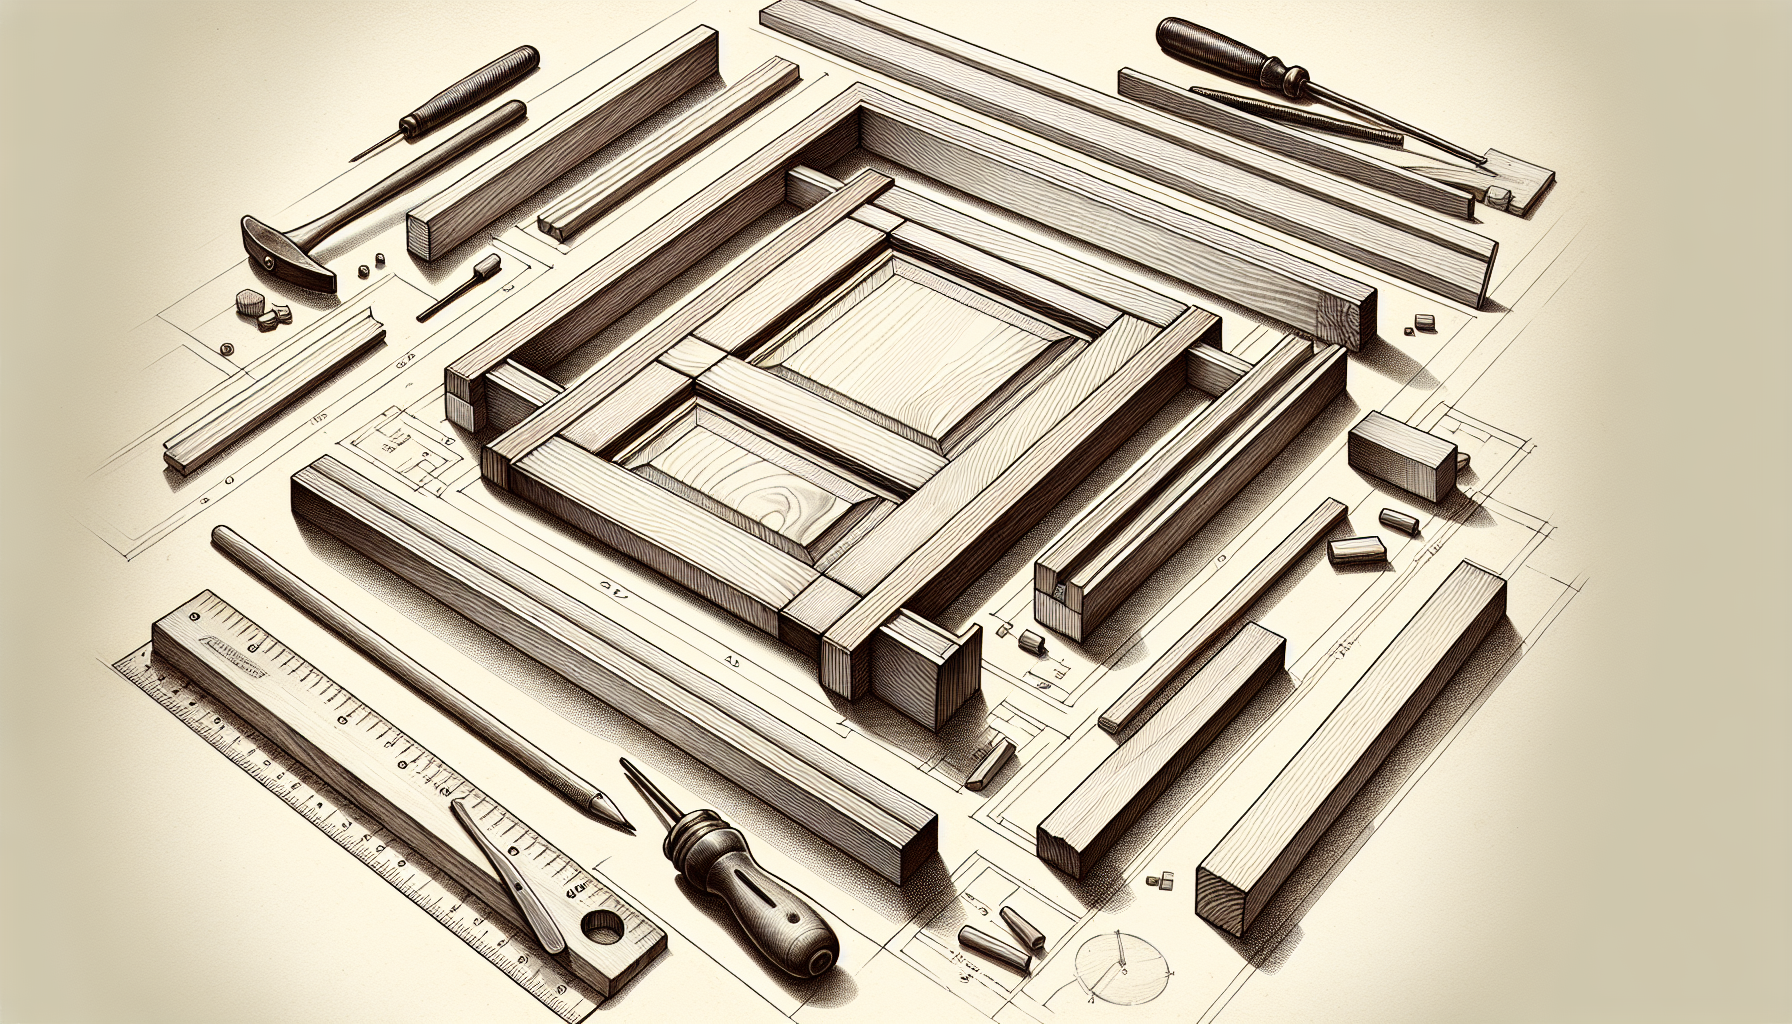 Illustration of the construction of shaker cabinet doors